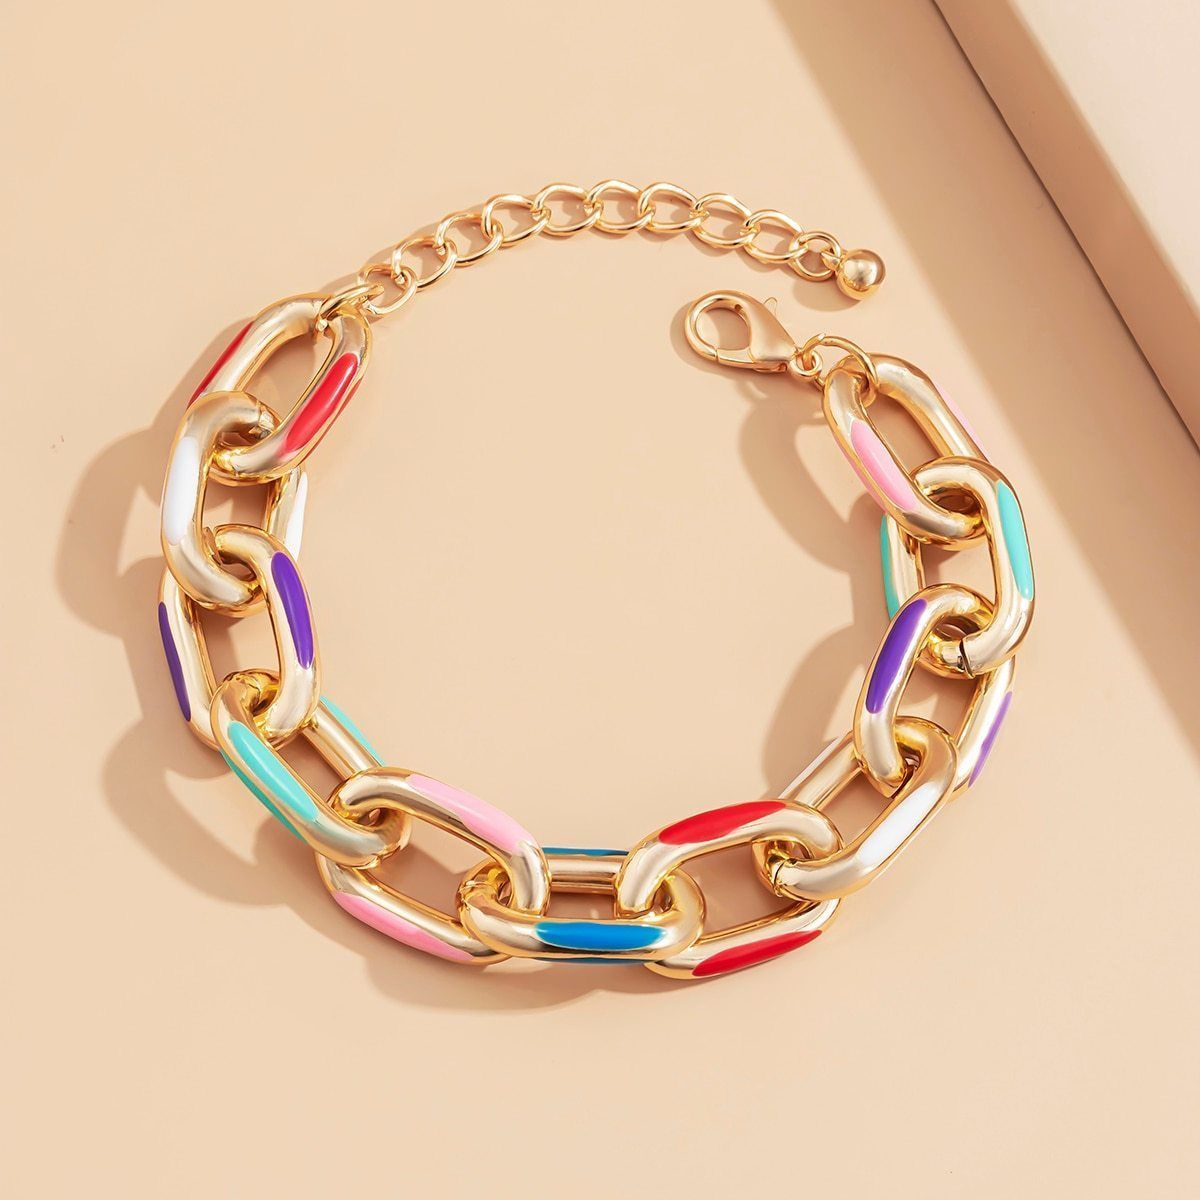 Bracelet Charm Jewelry Thick Aluminum Chain Printed Metal Couple Bangles 2021 Fashion - Touchy Style .